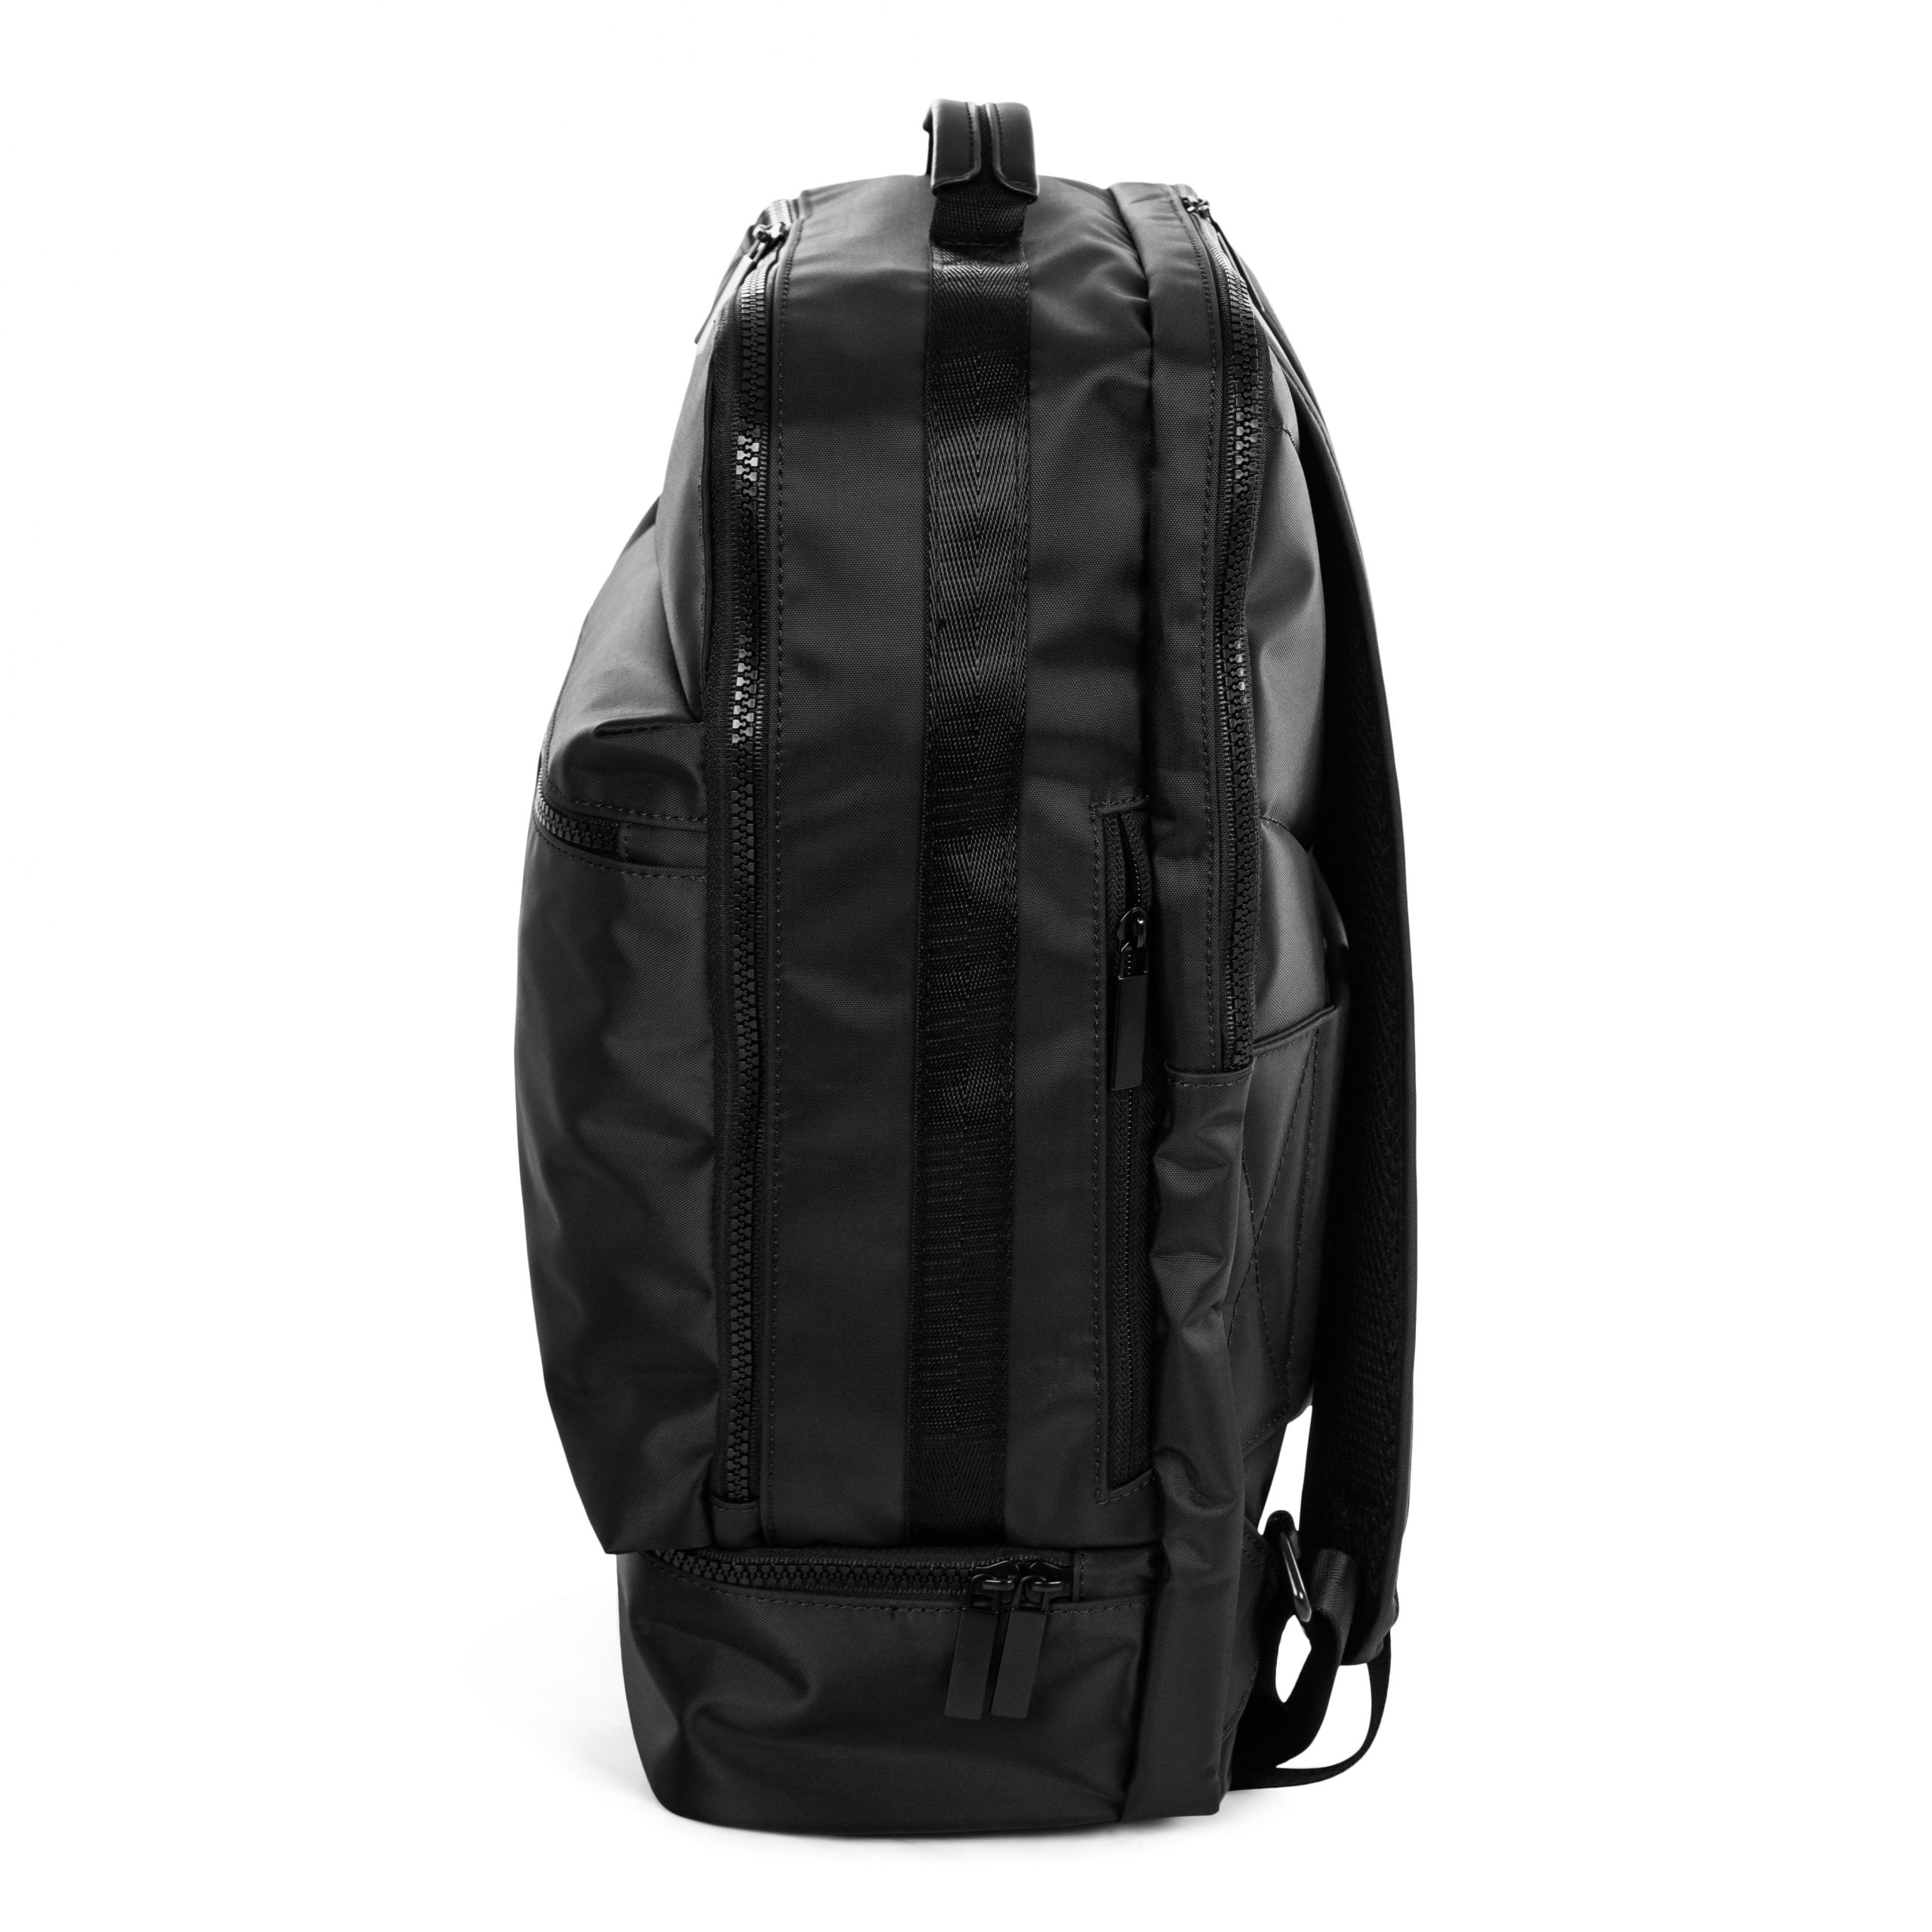 The Bugatti Group® Valais Backpack, Holds Lptops 15.6, 5.5 x 5.5